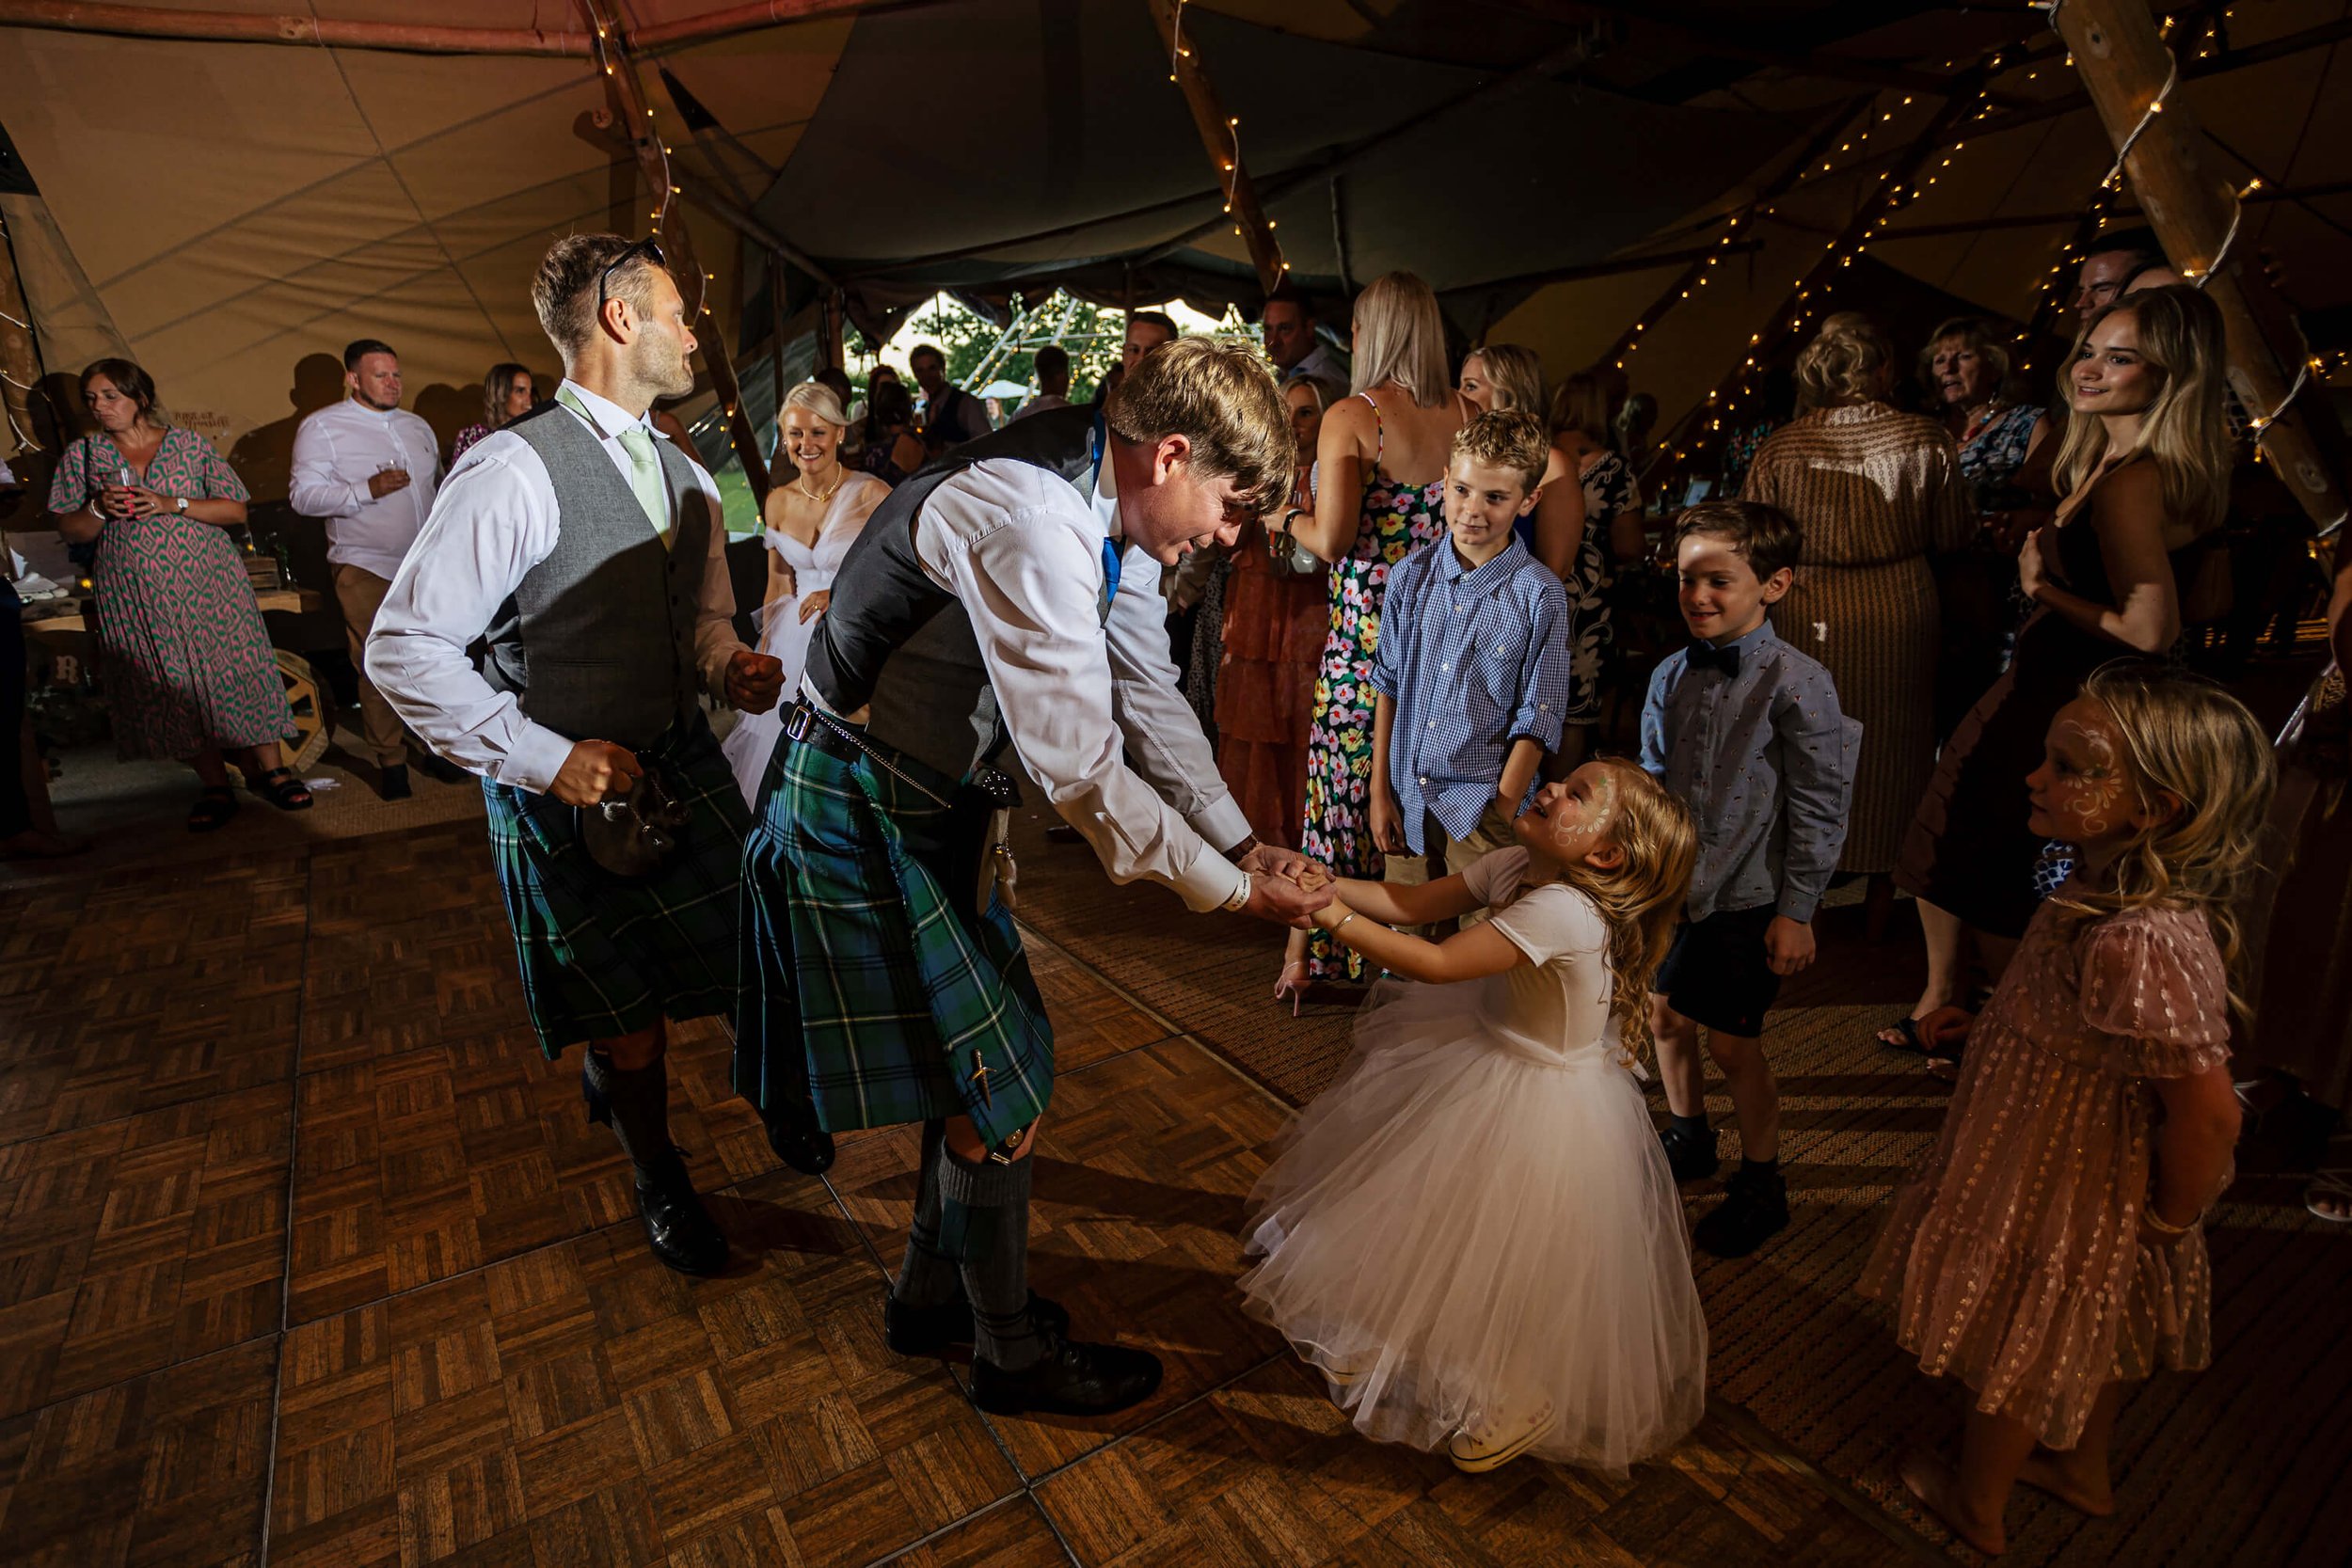 Groom and daughter on the dance floor at a wedding